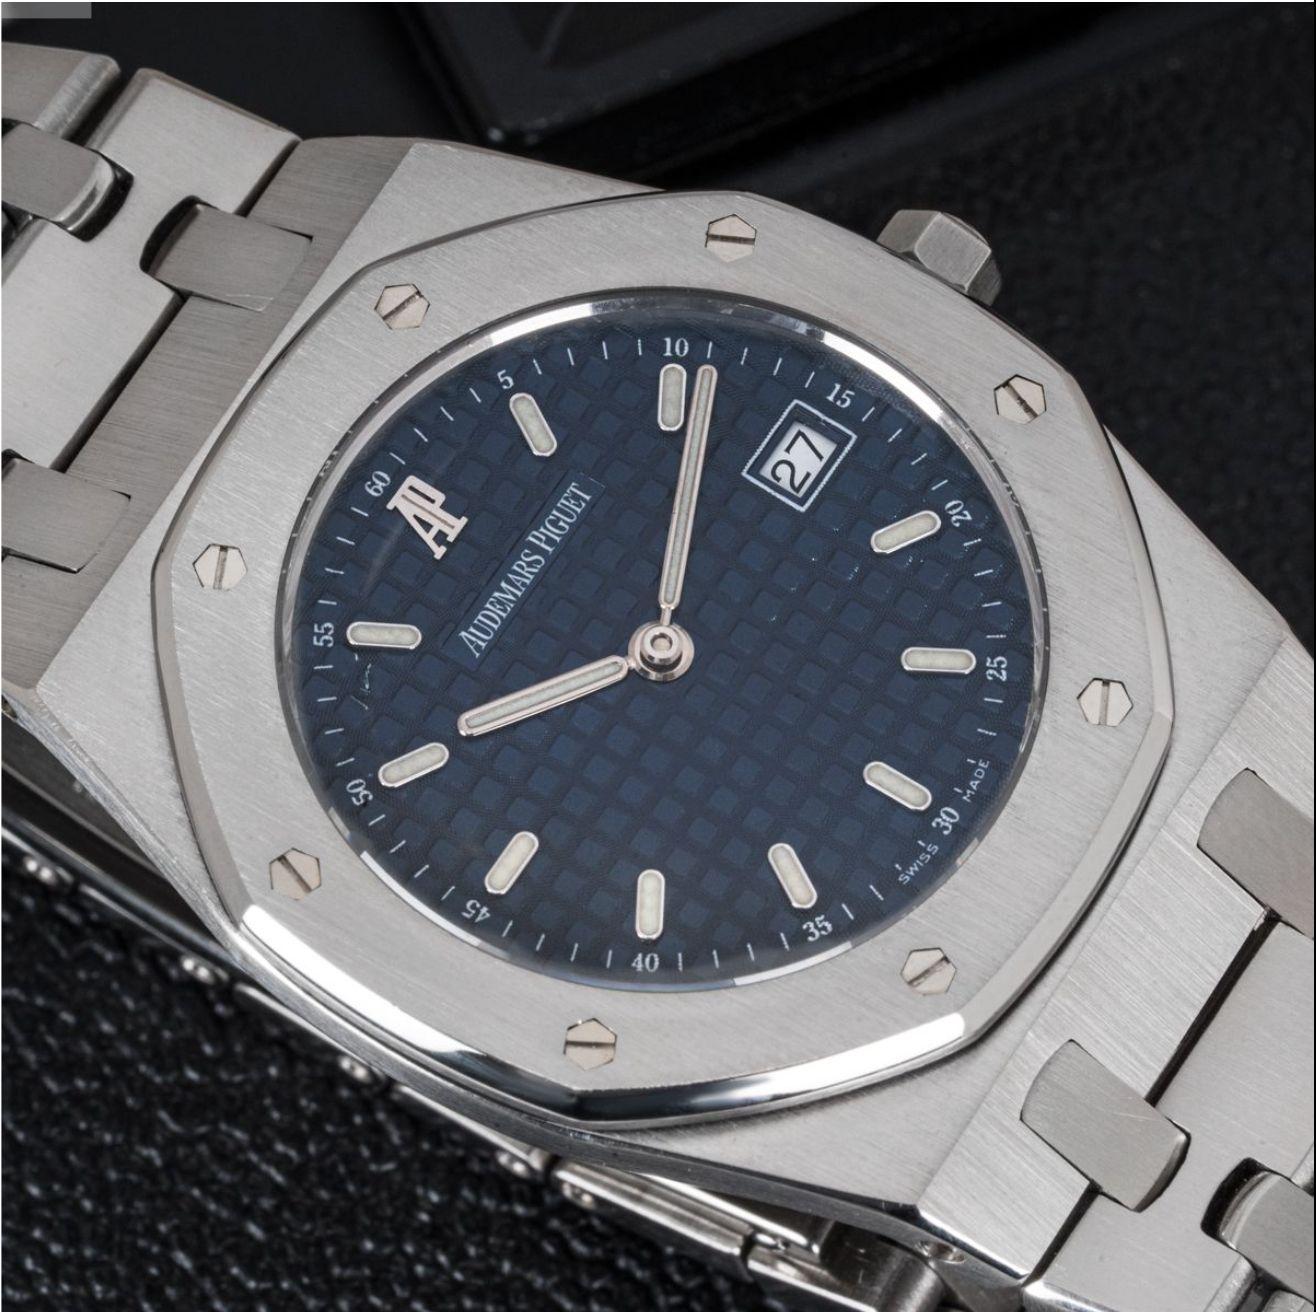 A 33mm stainless steel Royal Oak Ultra Thin by Audemars Piguet. Featuring a blue dial with grande tapisserie pattern, a date aperture and a steel bezel set with the 8-screw design. Fitted with a sapphire crystal, a quartz movement and a stainless